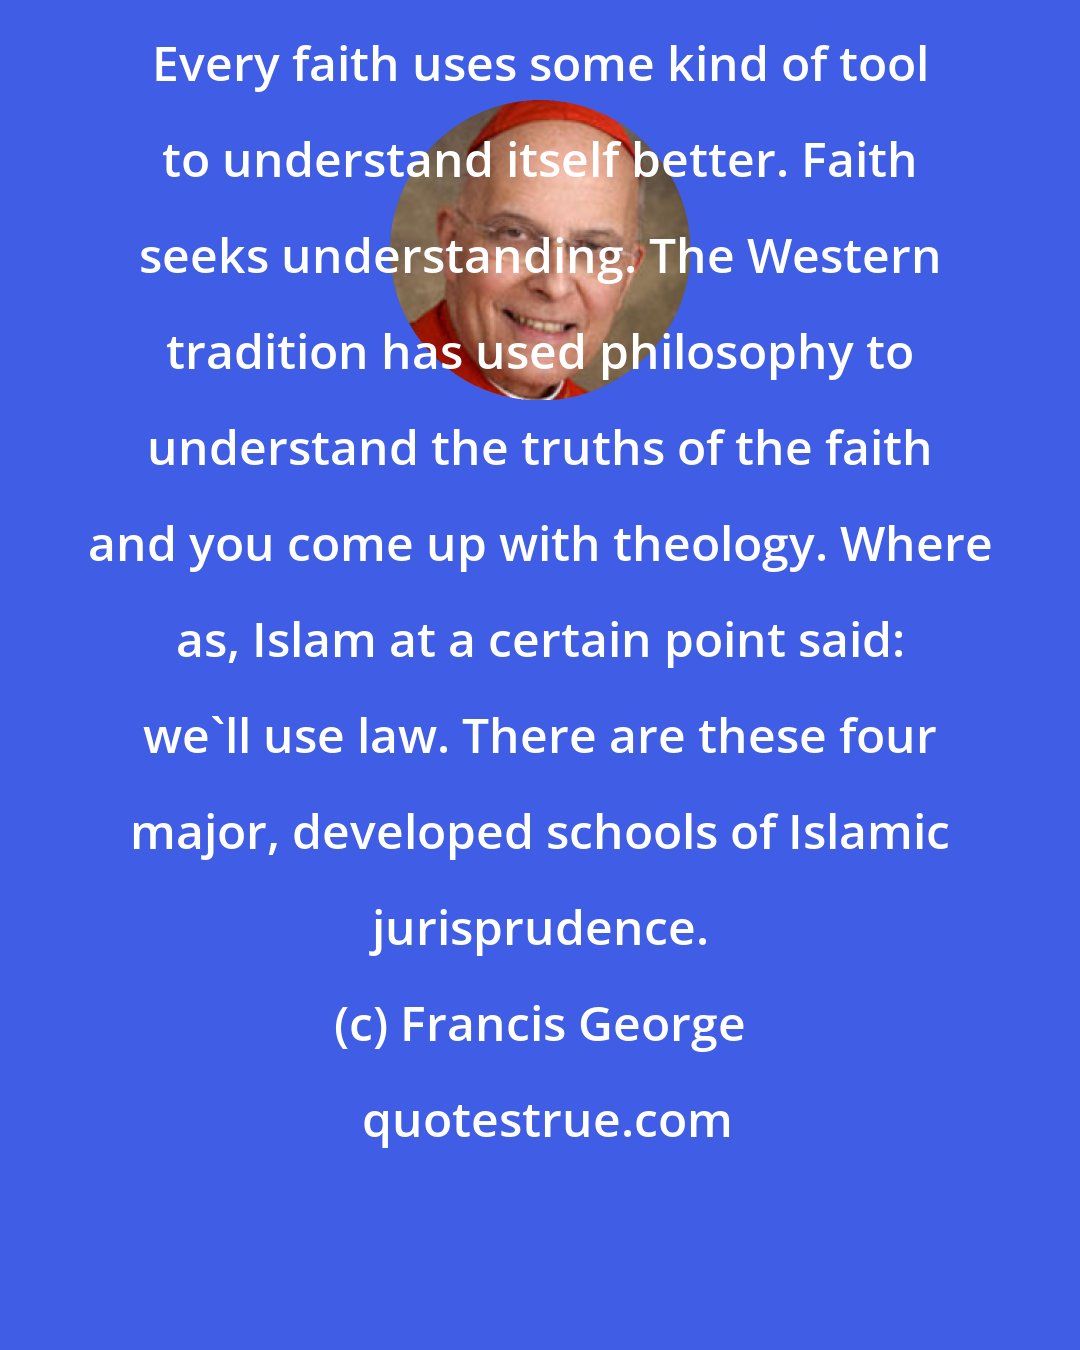 Francis George: Every faith uses some kind of tool to understand itself better. Faith seeks understanding. The Western tradition has used philosophy to understand the truths of the faith and you come up with theology. Where as, Islam at a certain point said: we'll use law. There are these four major, developed schools of Islamic jurisprudence.